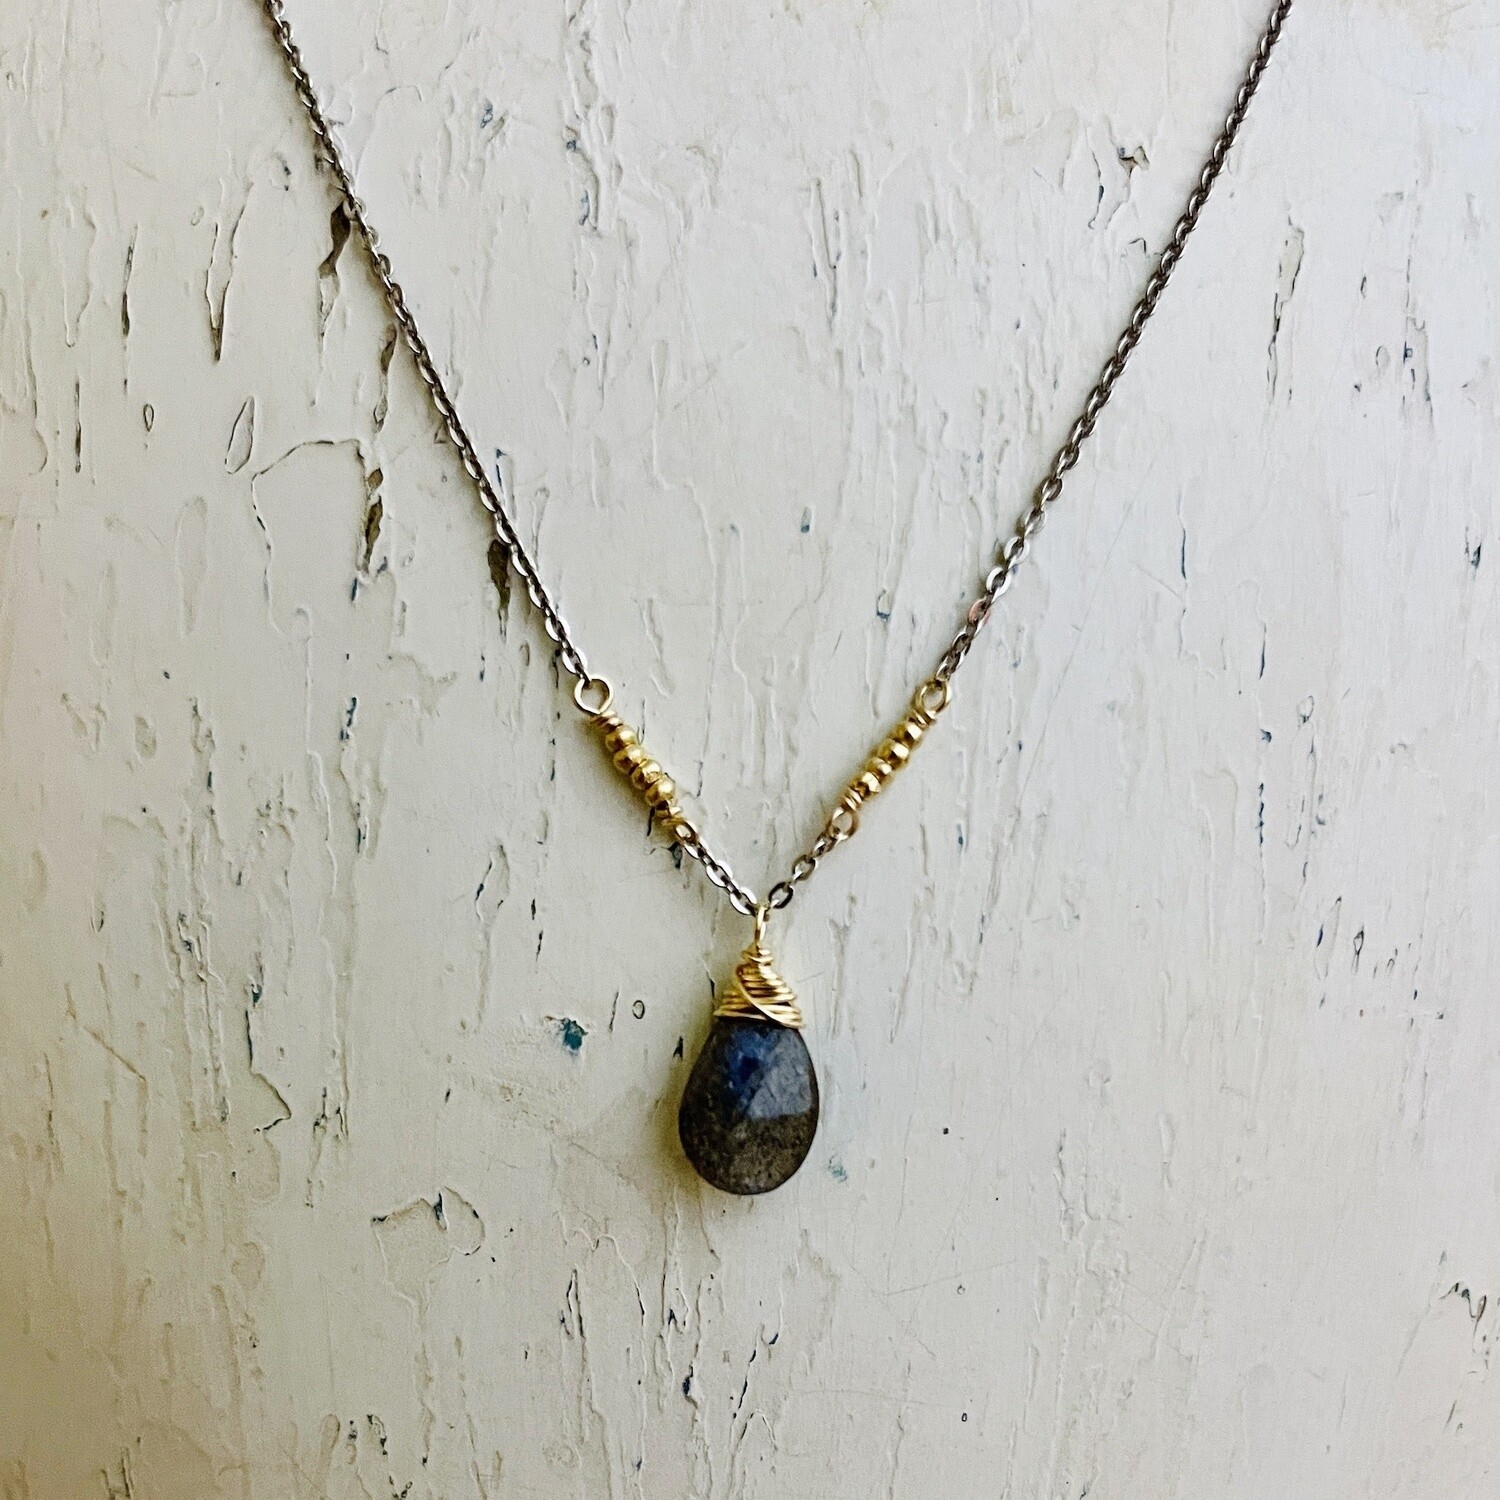 14kt gold filled wrapped 12mm faceted labradorite pear on oxidized sterling chain necklace - dno